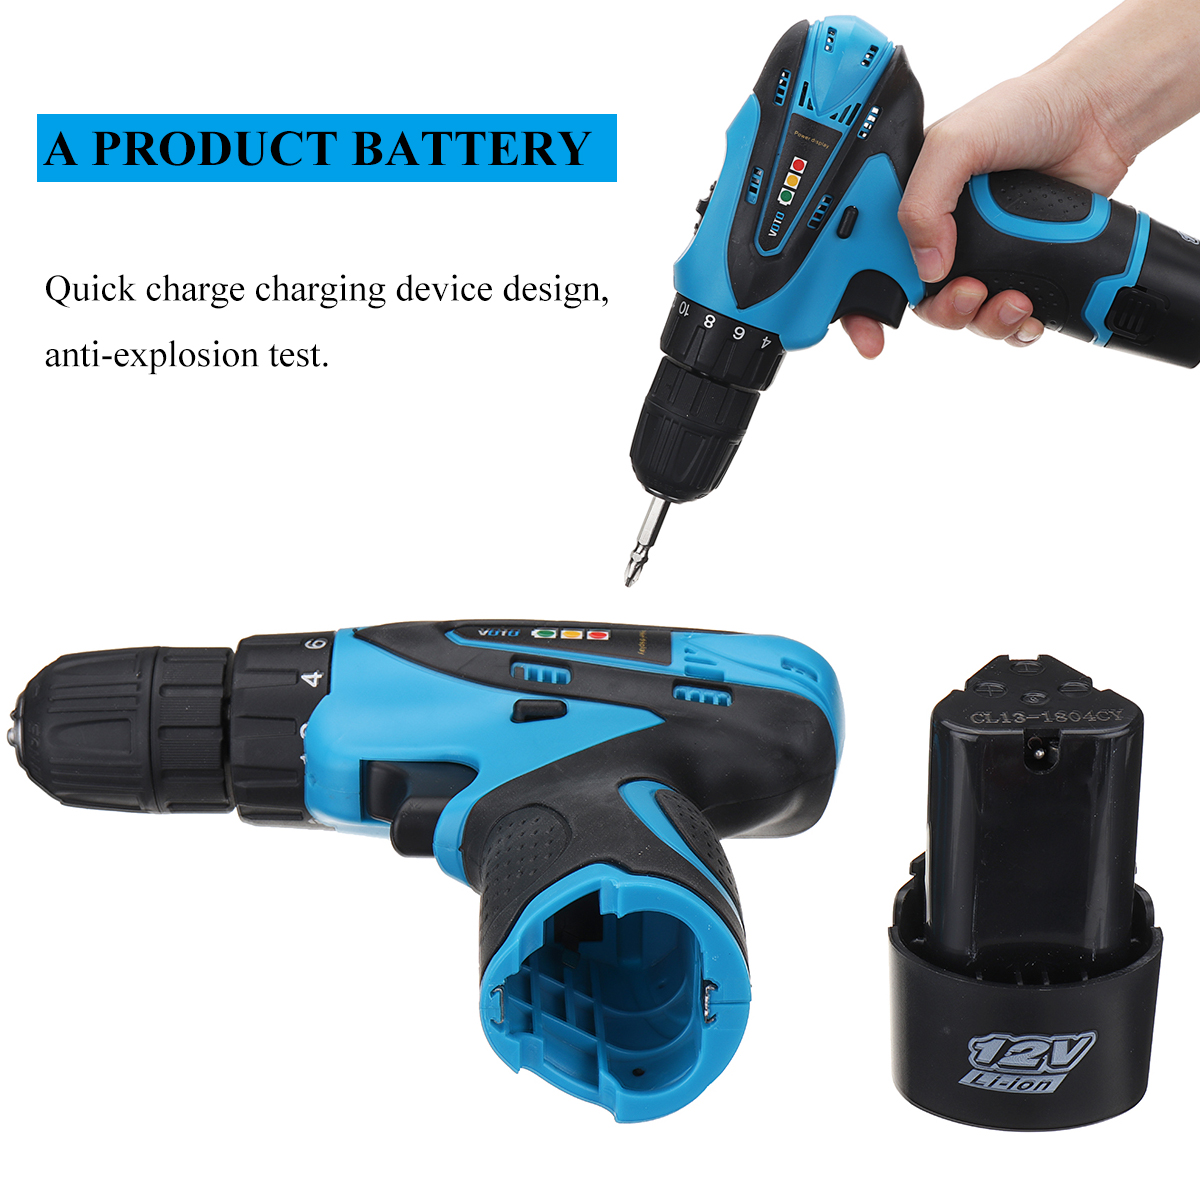 VOTO-12V-Cordless-Power-Drill-Driver-Screw-2-Speed-Lithium-ion-Electric-Screwdriver-with-Battery-1289387-7